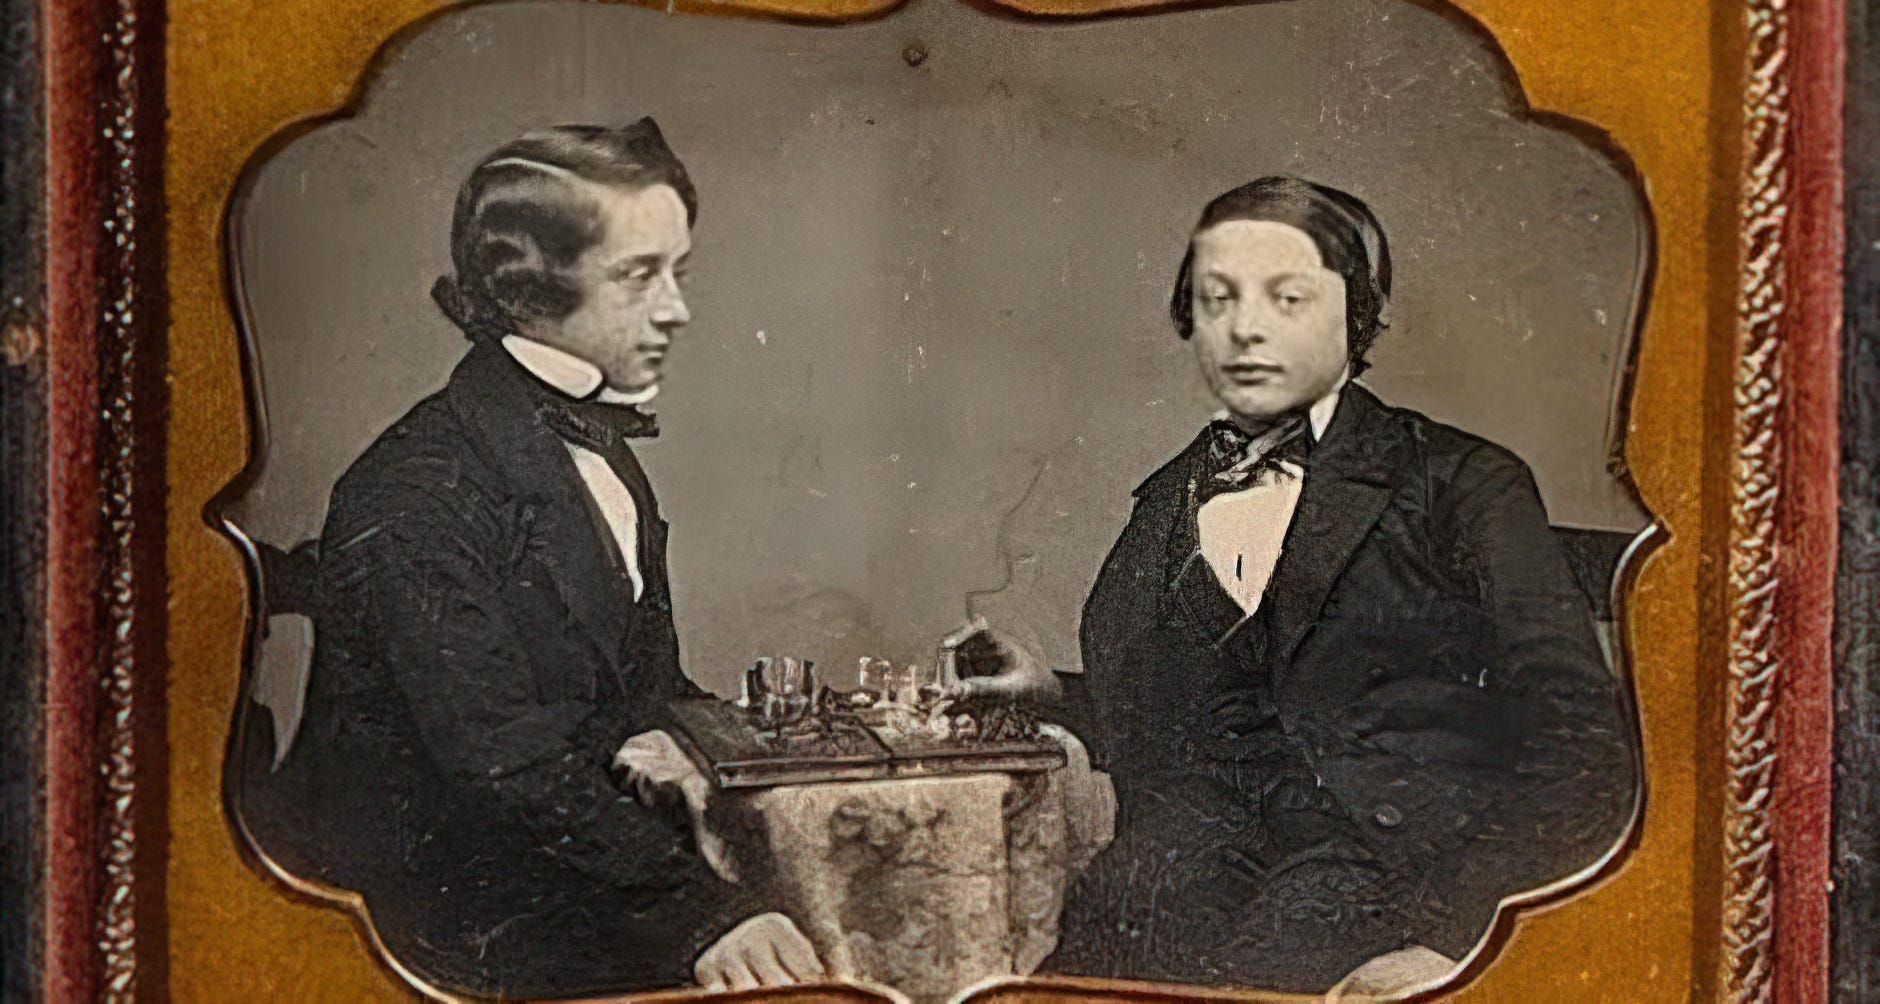 Chess Phenomenon Paul Morphy: A legend of the American chess